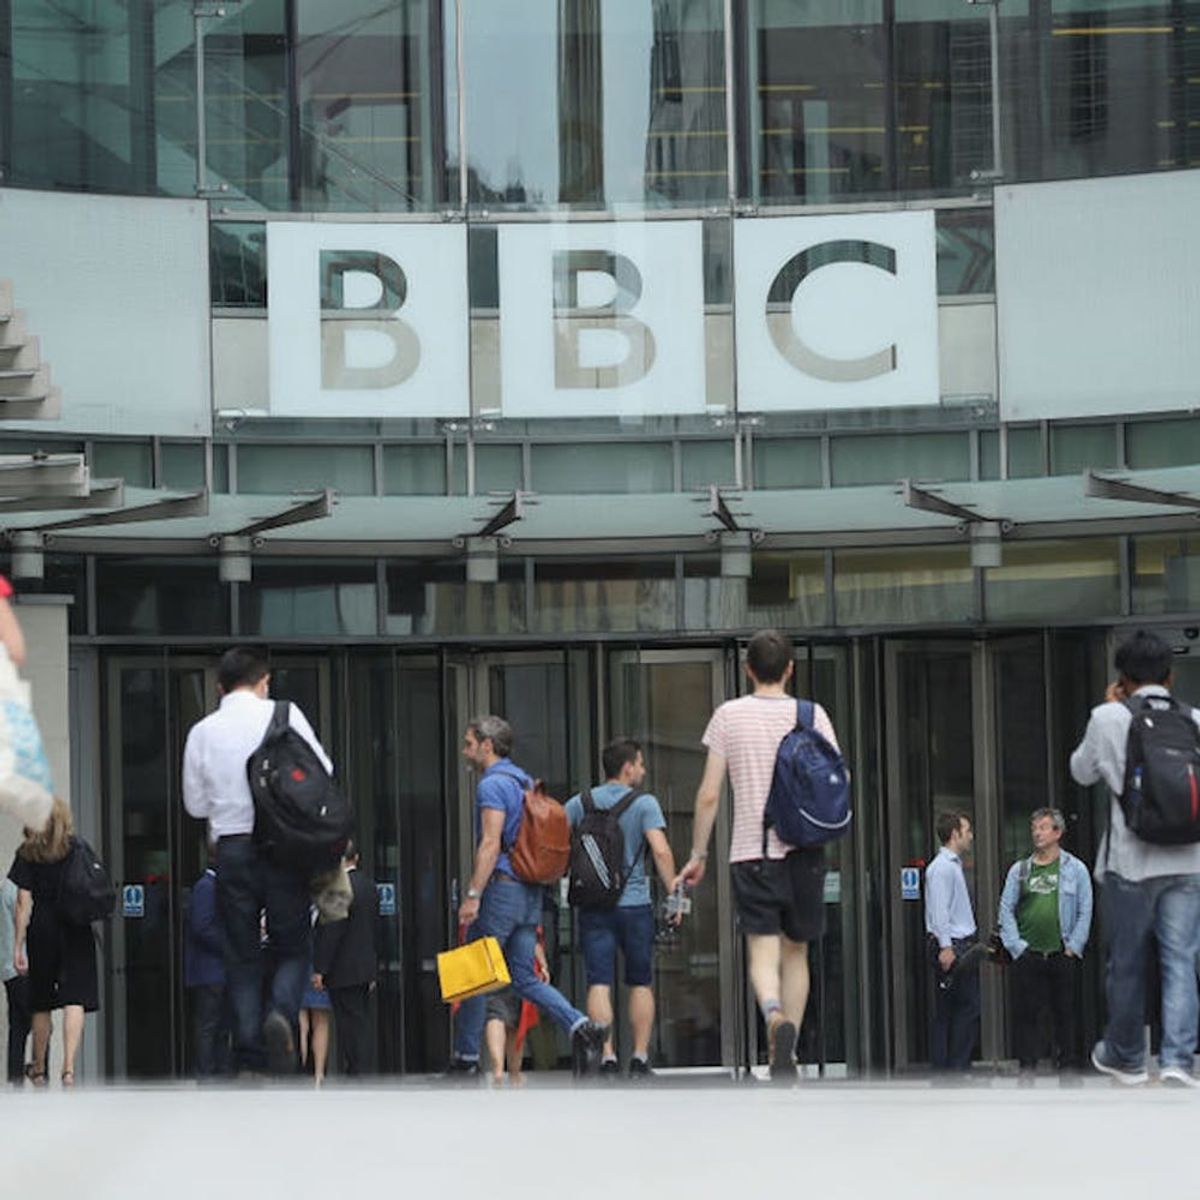 The Women of the BBC Are Set to Fight the Gender Pay Gap With Legal Action